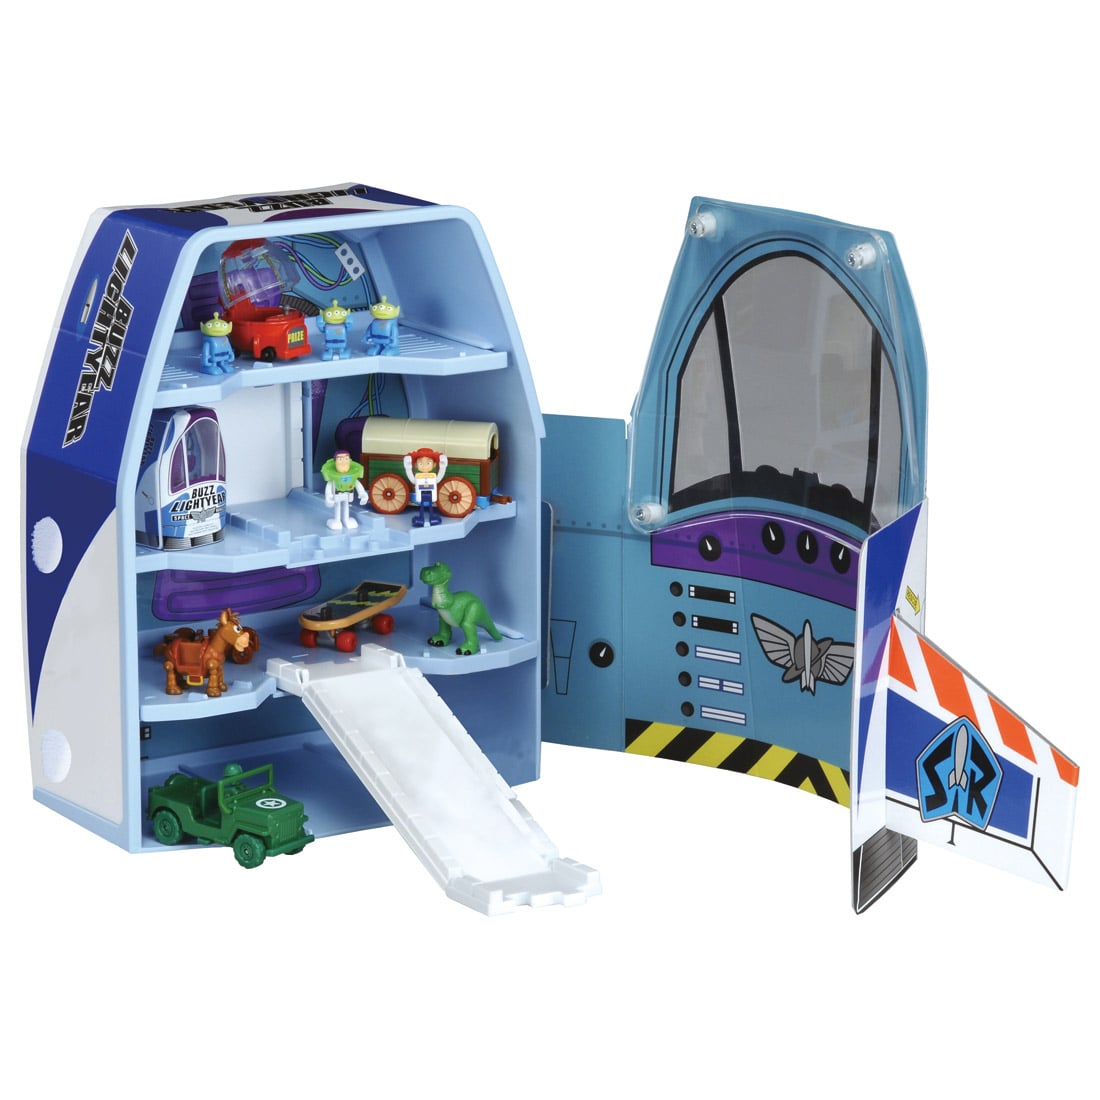 Dream Tomica Ride On Toy Story Buzz Lightyear Spaceship Case